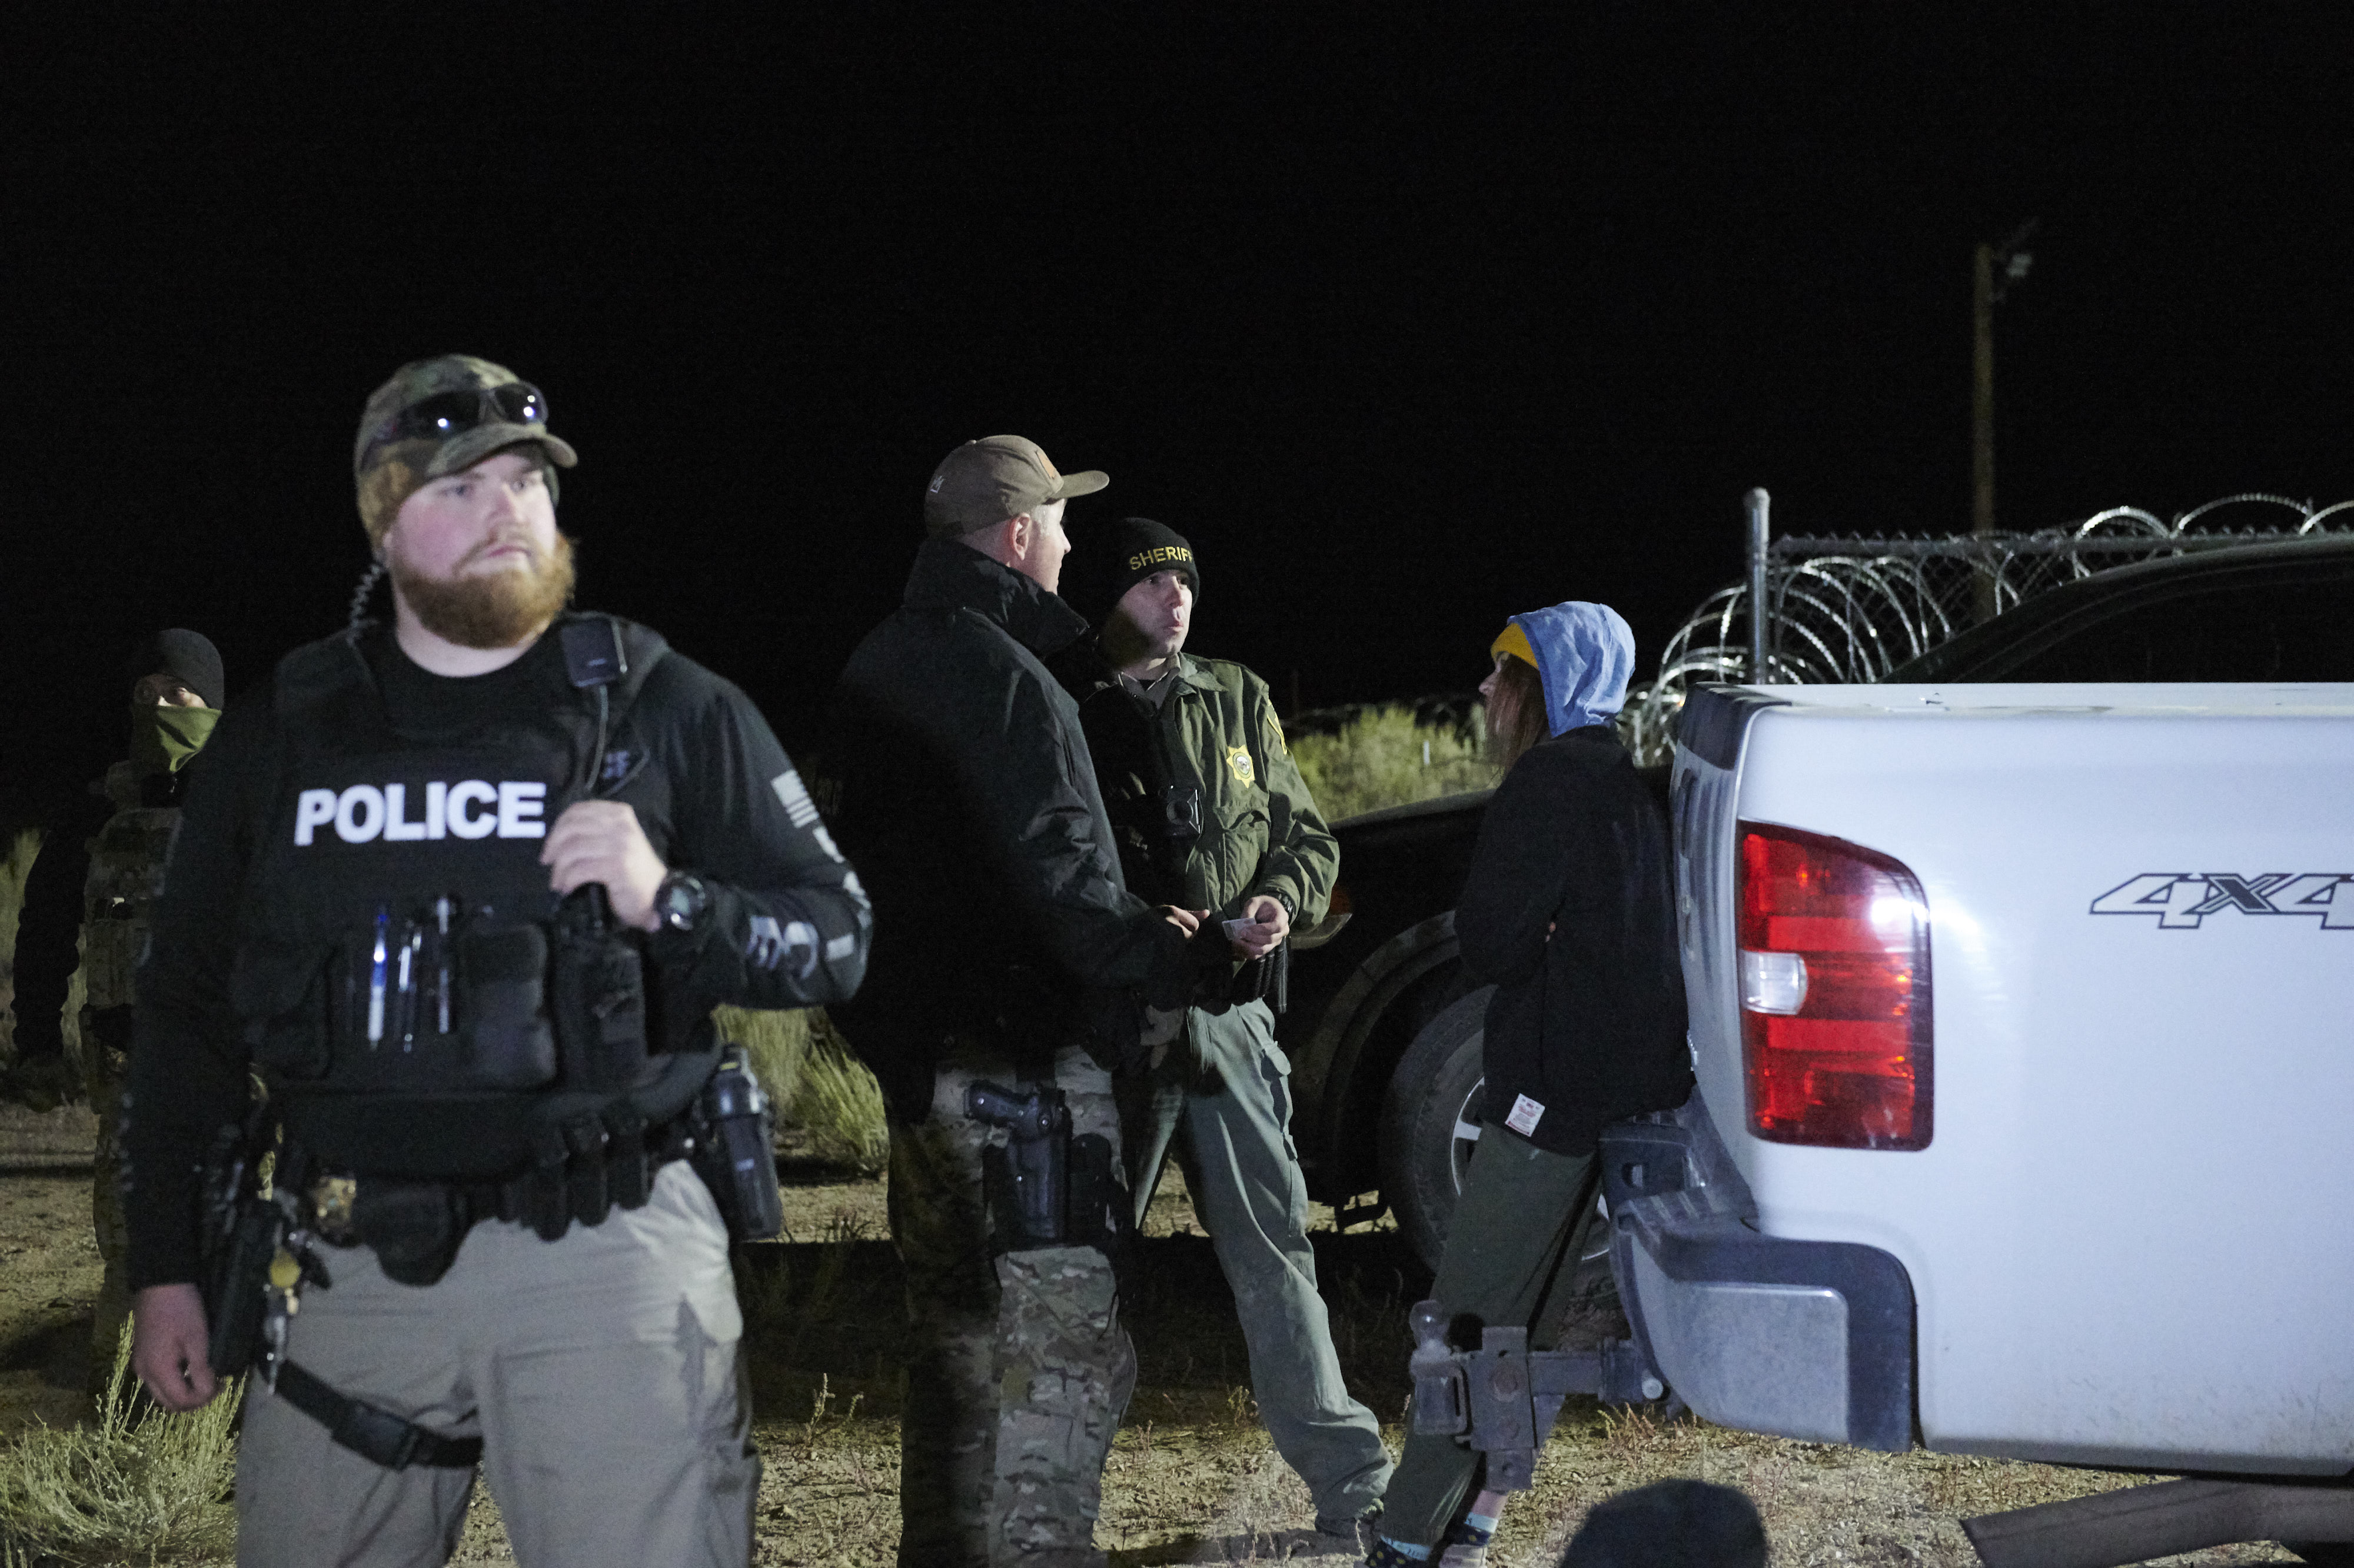 An attendee is detained then released after briefly physically crossing a security line , as attendees gathered to "storm" Area 51, at an entrance to the military facility near Rachel, Nevada on September 20, 2019. (Photo by BRIDGET BENNETT/AFP/Getty Images)